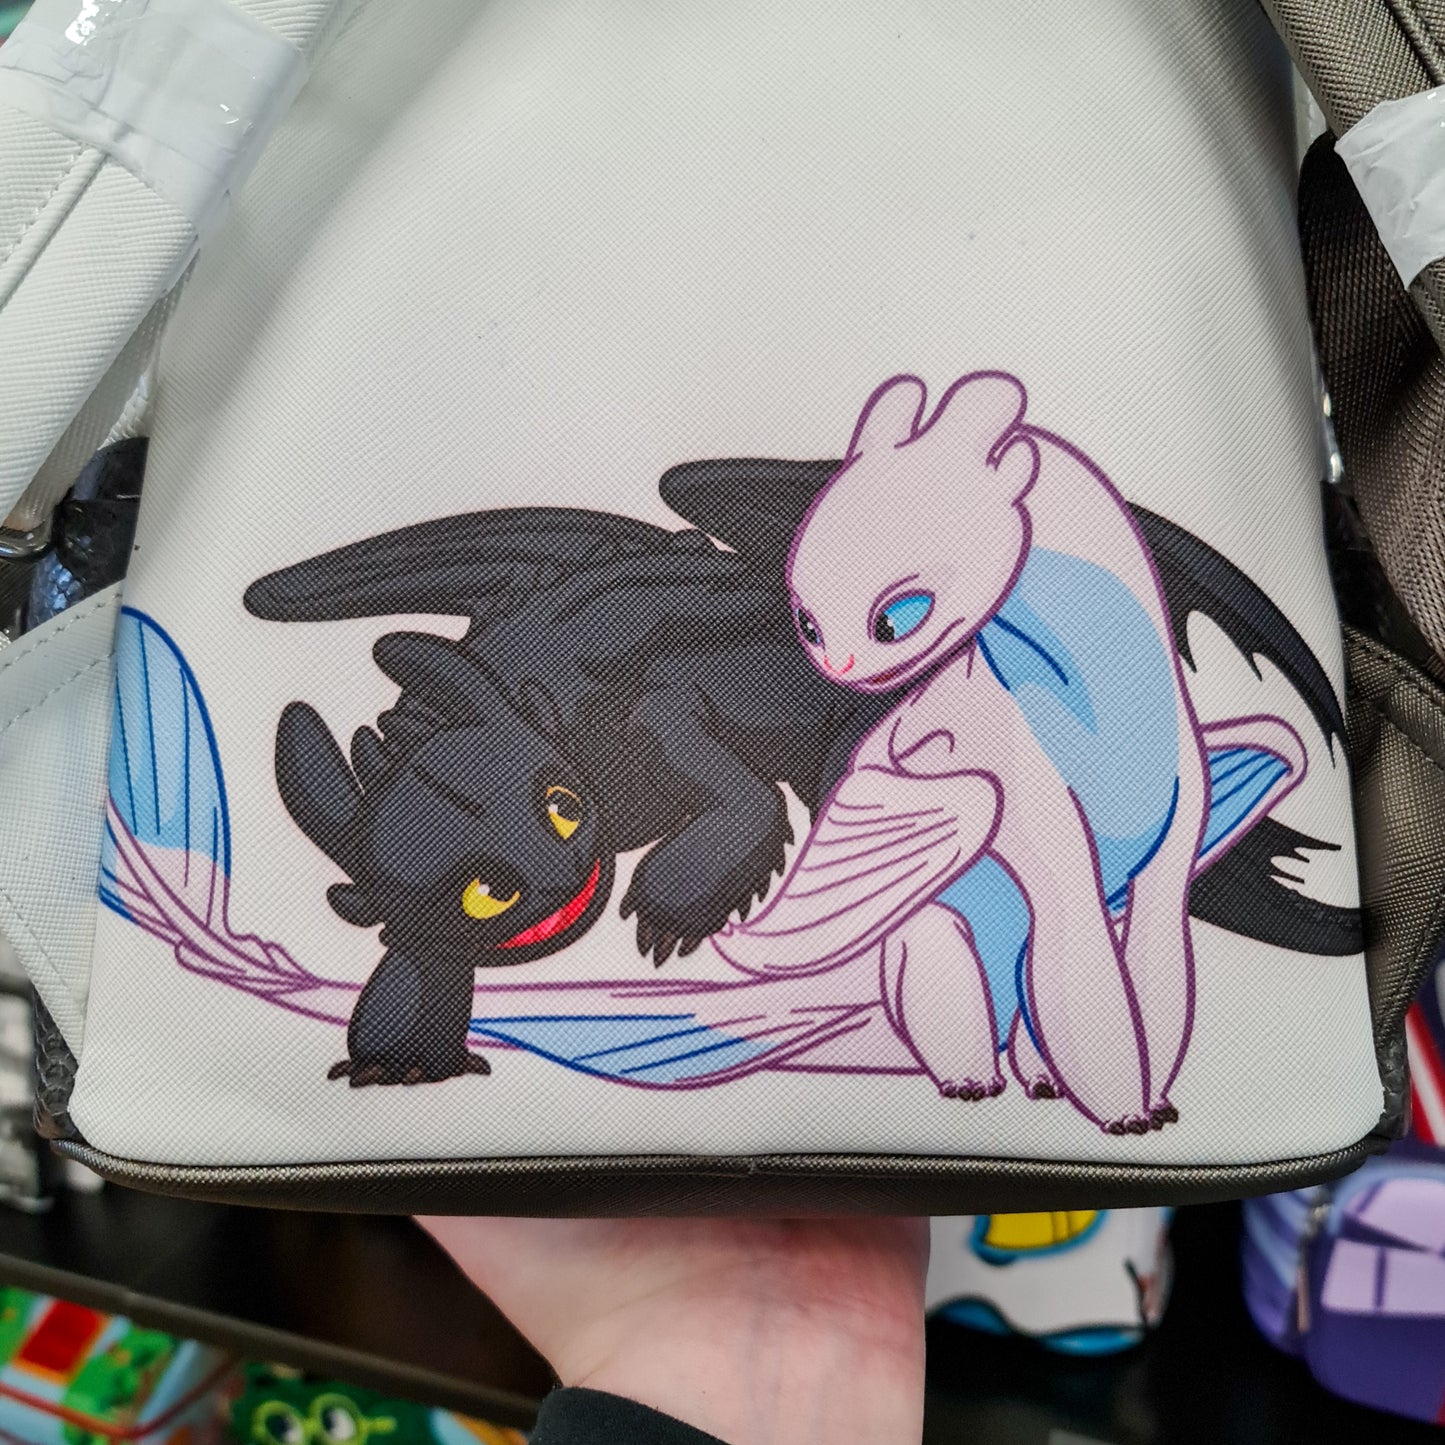 HOW TO TRAIN YOUR DRAGON FURIES MINI BACKPACK